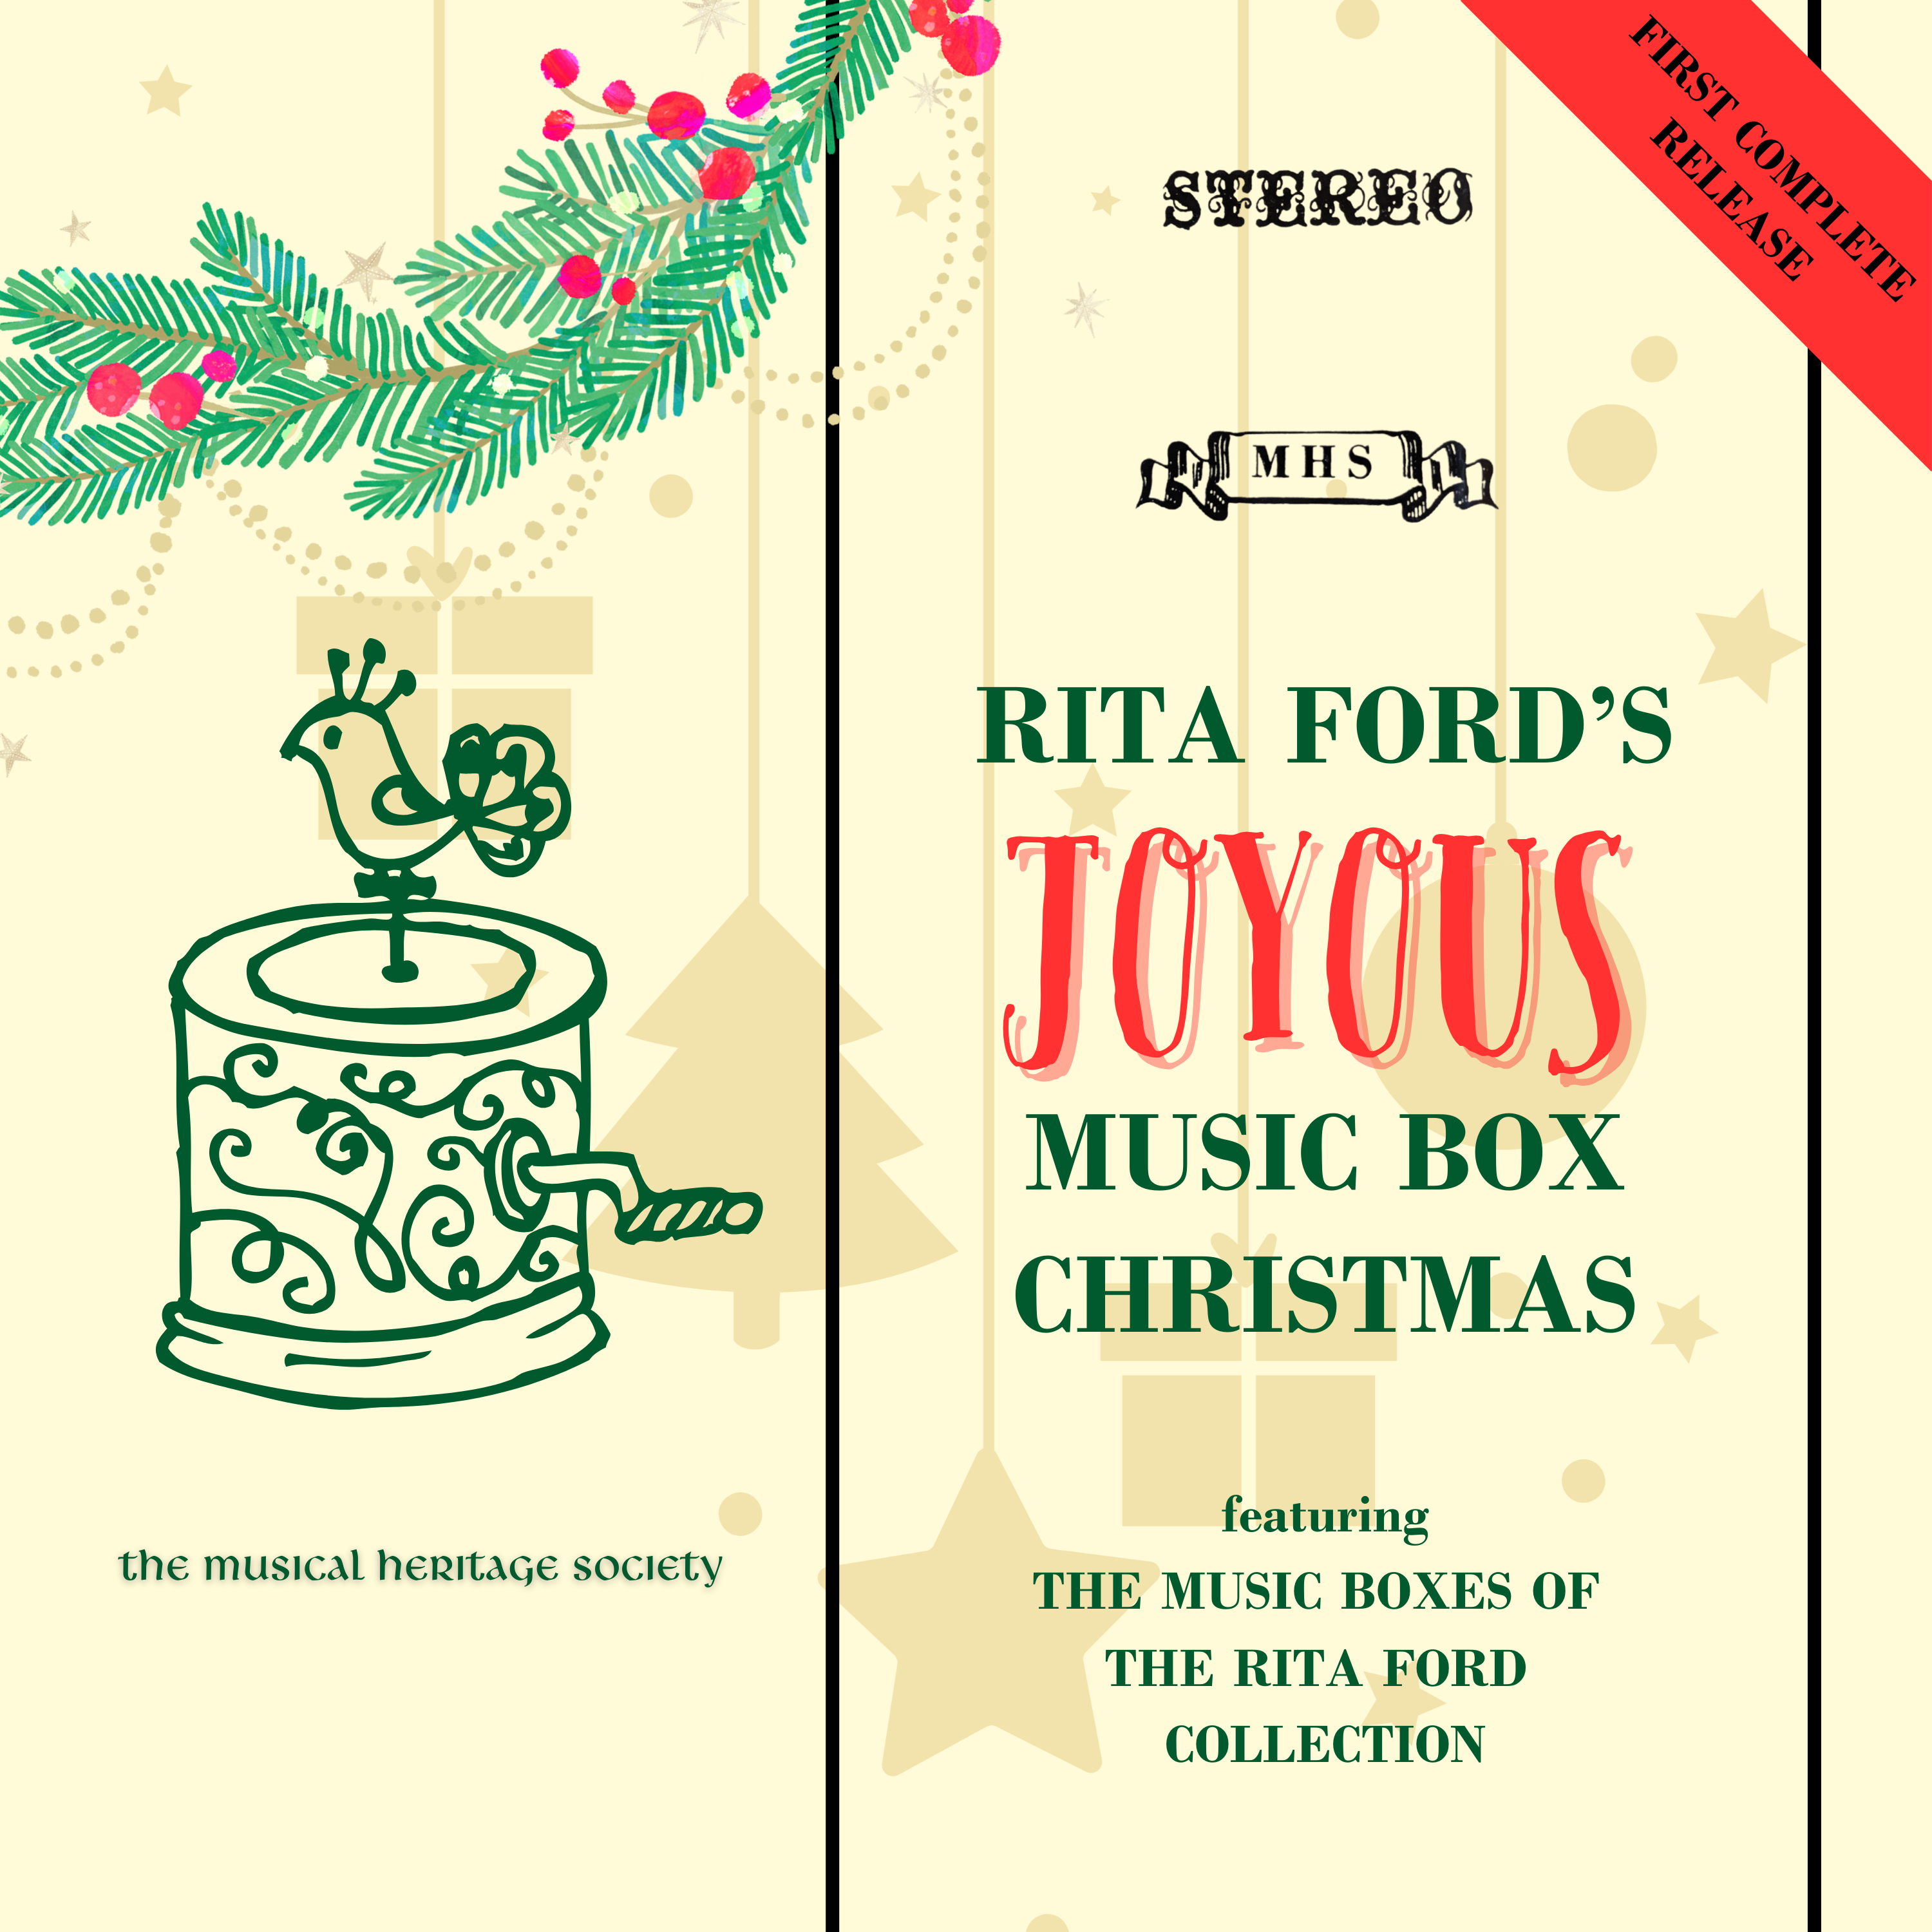 EXPLORING MUSIC: Most Rich in Sound - Rita Ford's Joyous Music Box Christmas, Vol. II